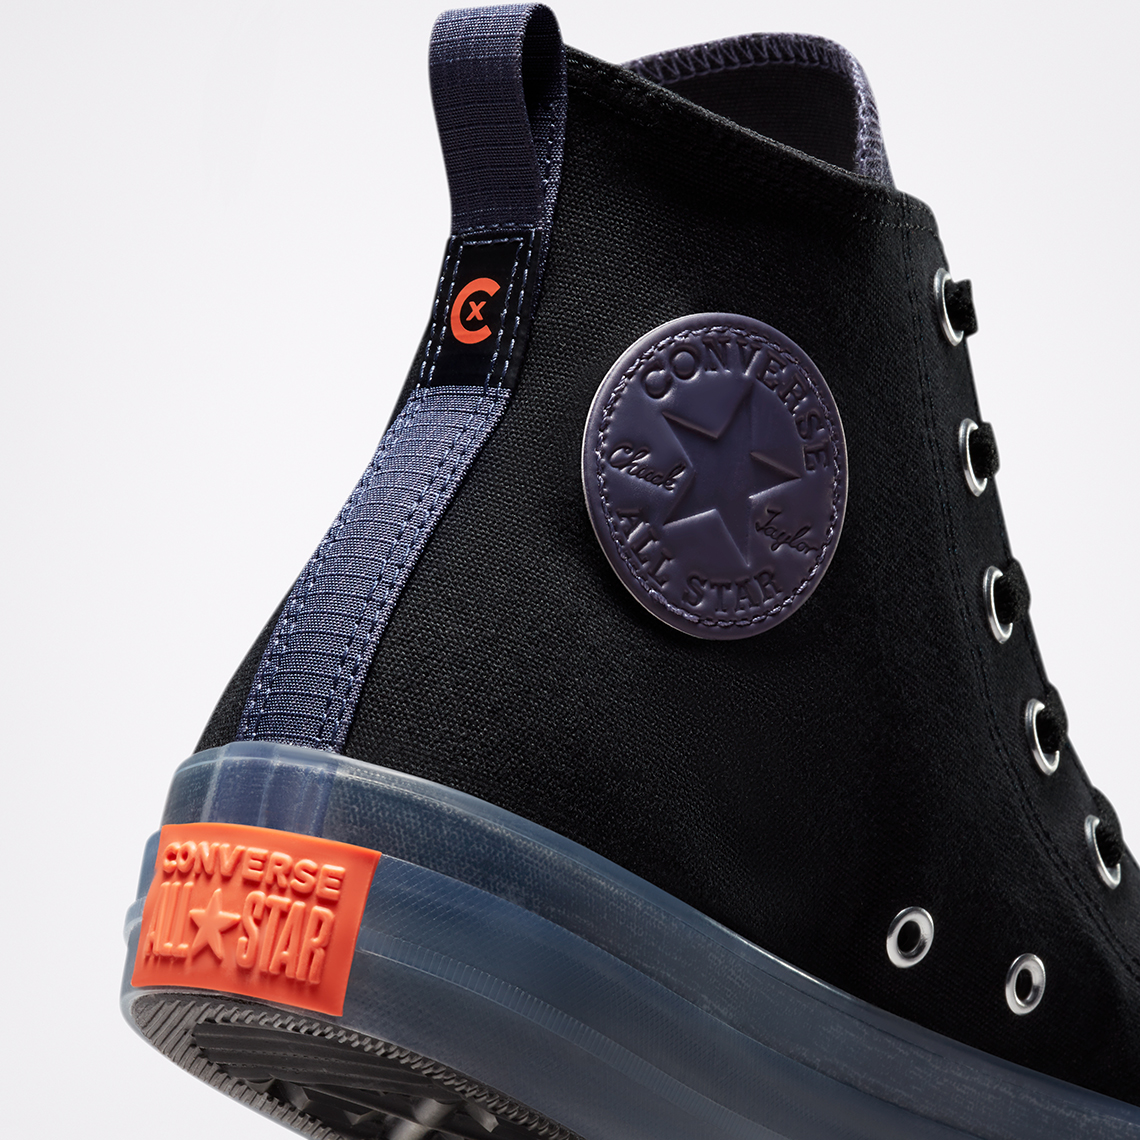 Converse Launches a Surprise Project with Scooby-Doo Featuring the All-Star Chuck